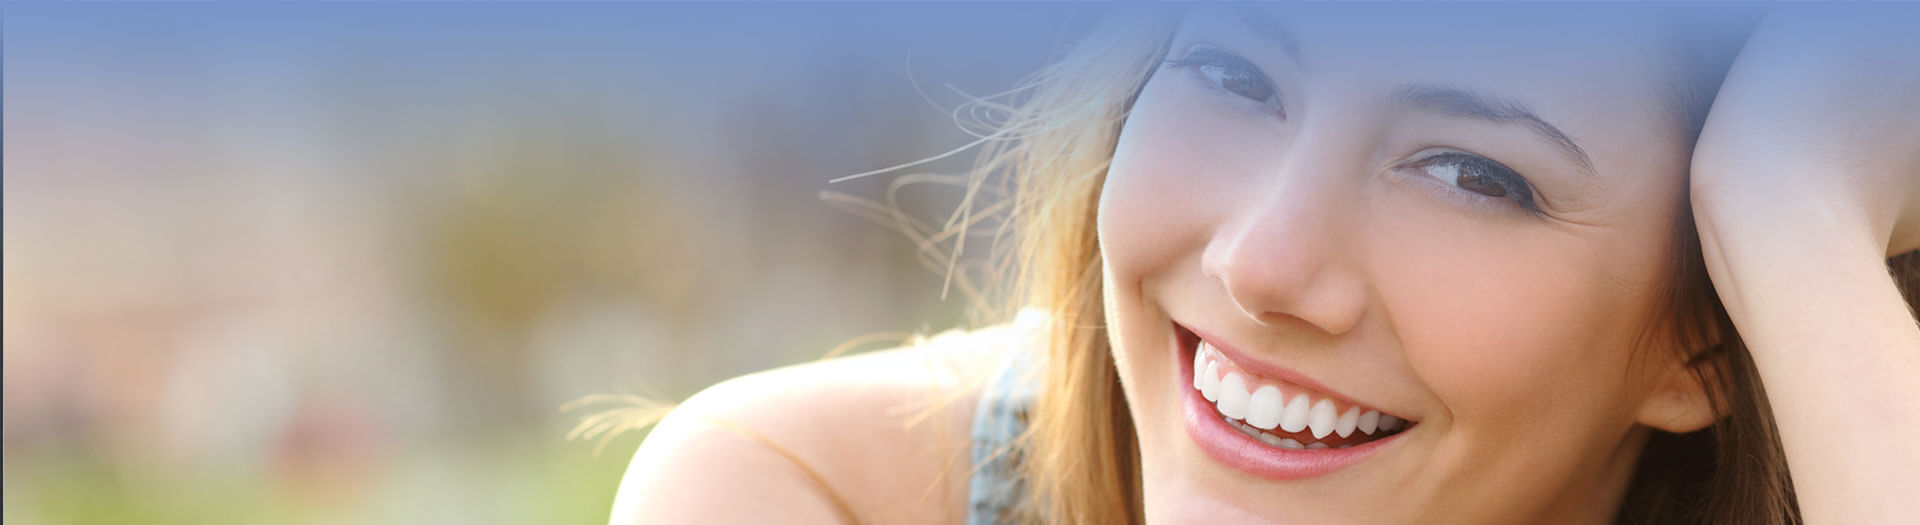 Girl smiling with perfect smile and white teeth